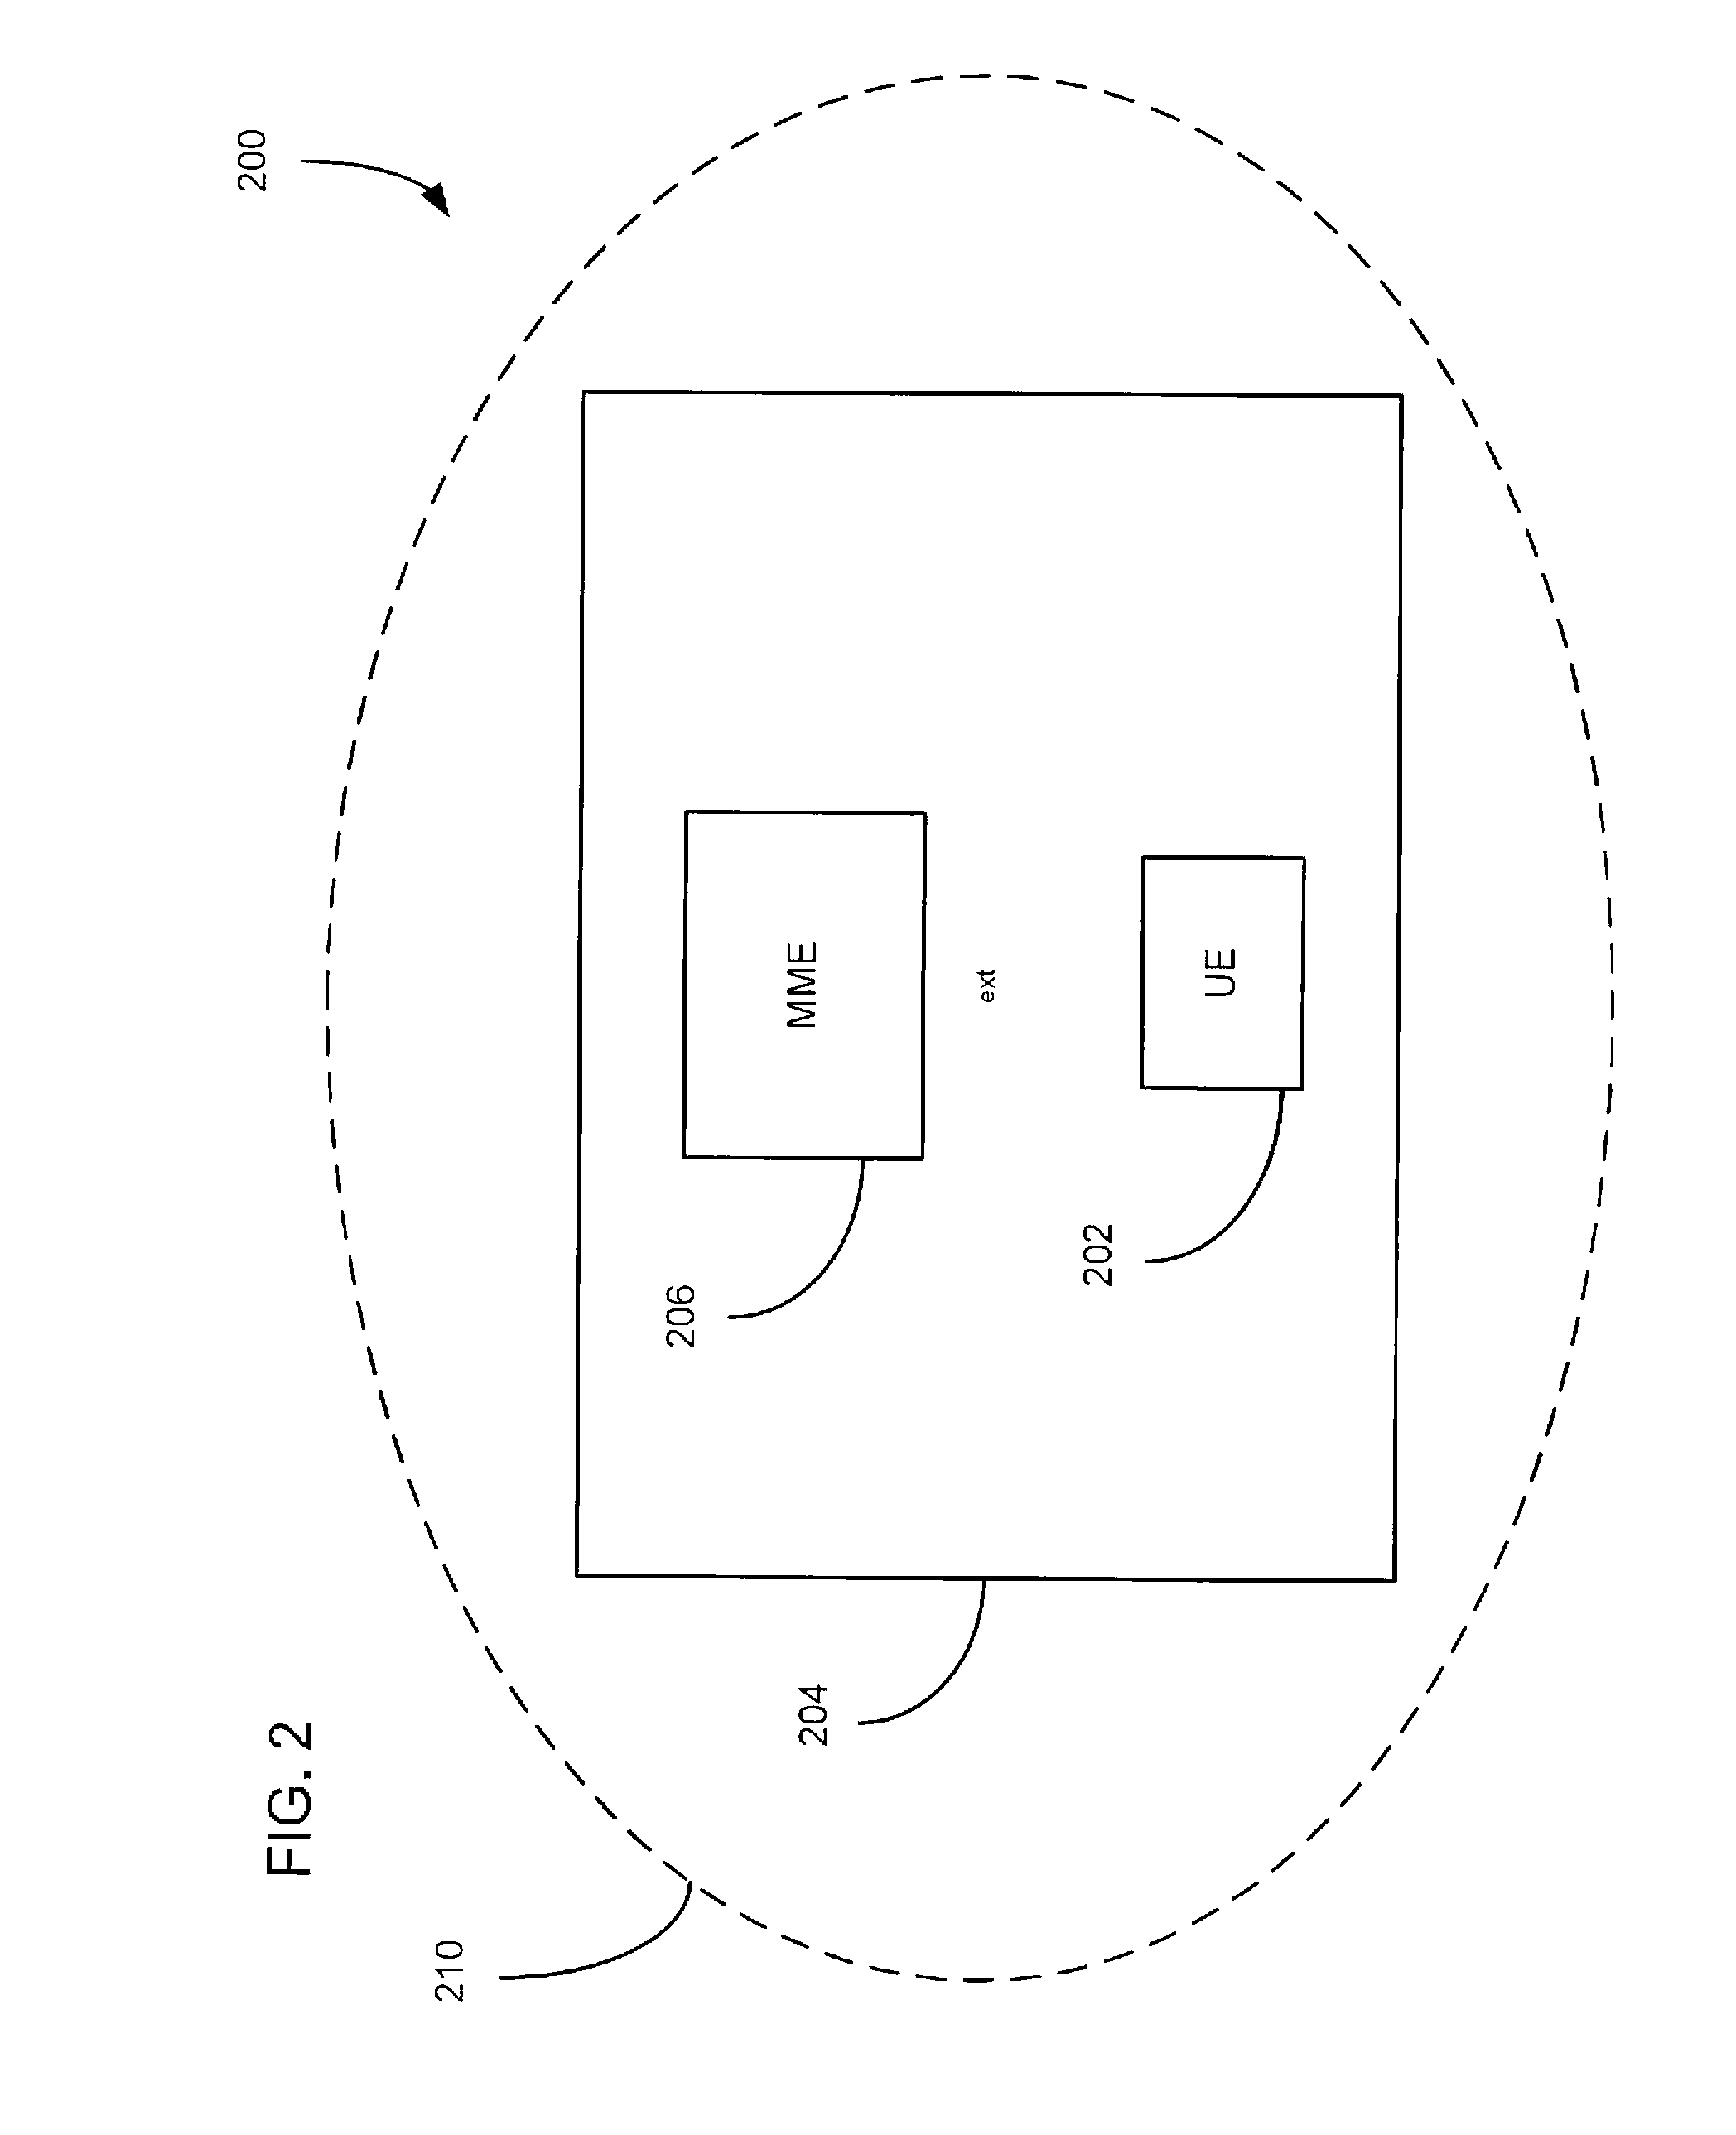 System and method for utilizing a temporary user identity in a telecommunications system